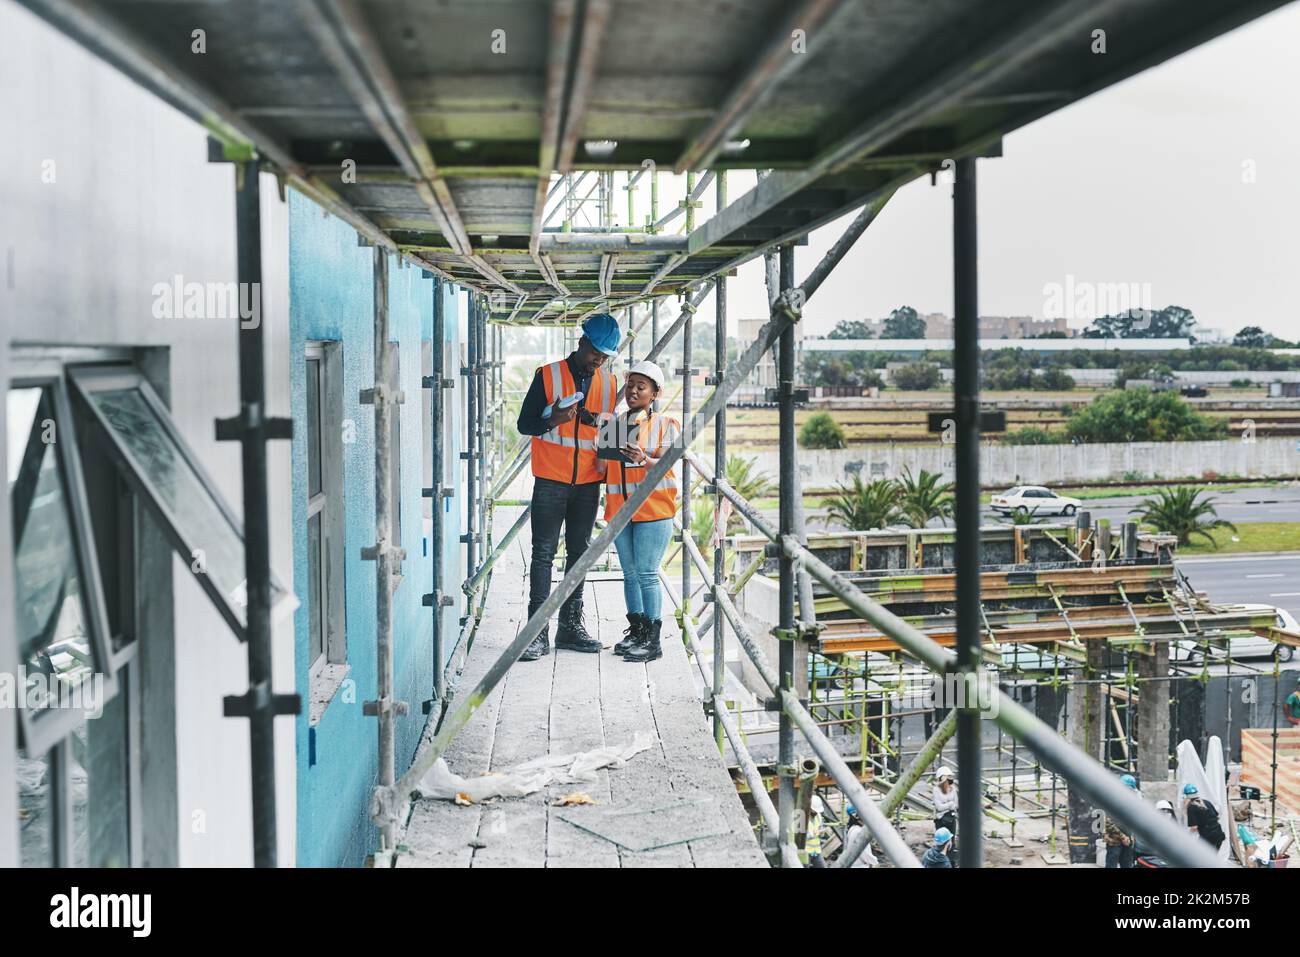 Having organised, digital processes helps keep your project on time. Shot of a young man and woman using a digital tablet while working at a construction site. Stock Photo